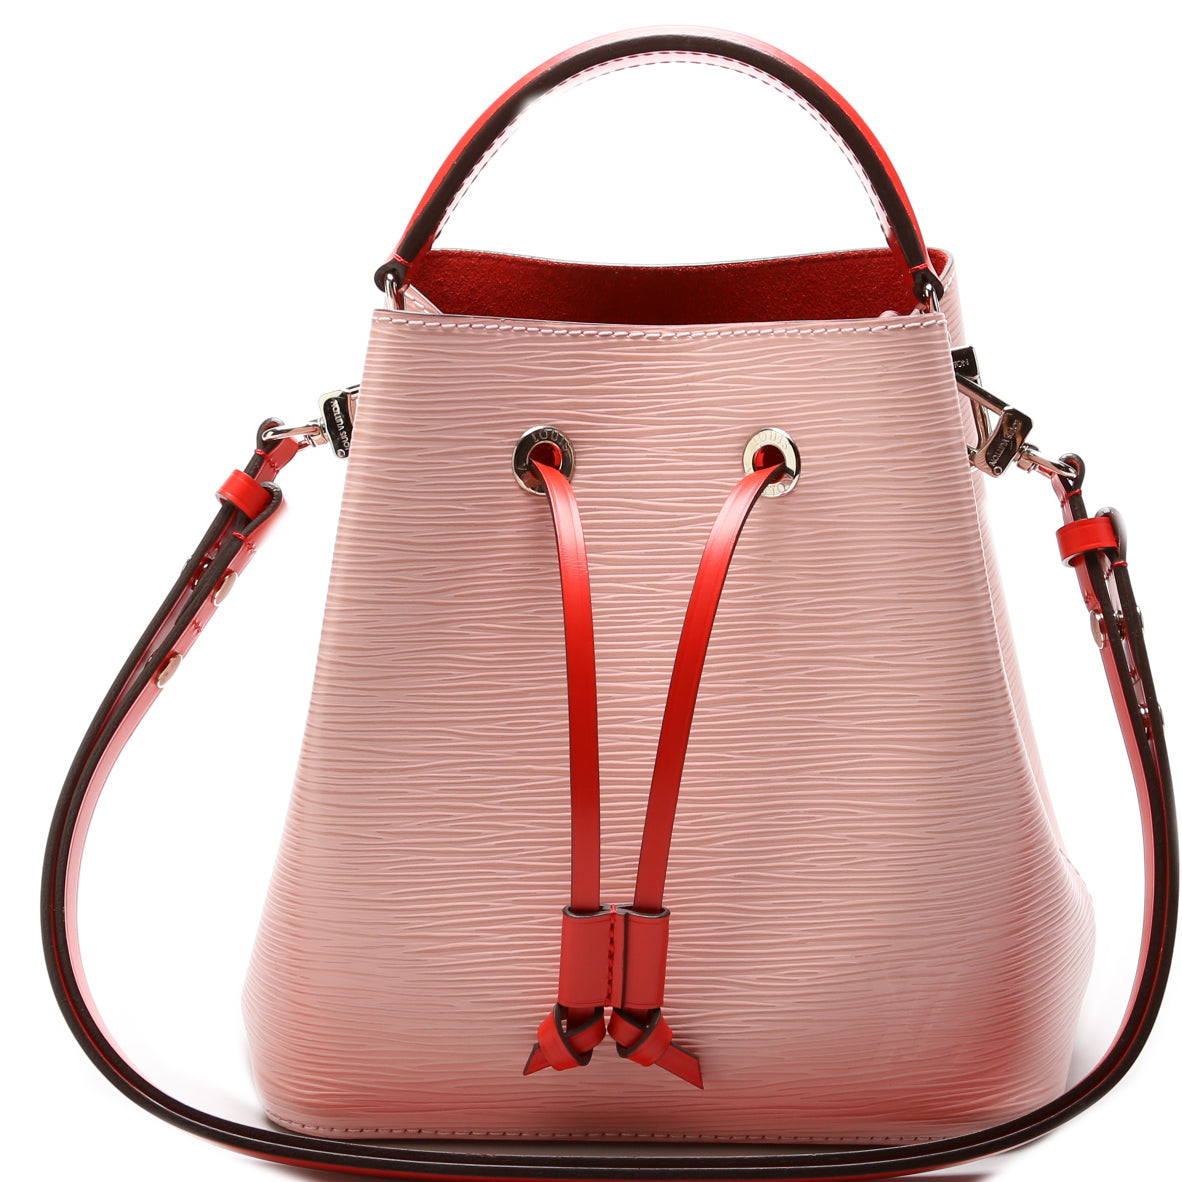 The Louis Vuitton Neonoe Bag Now Comes in 6 Colors of Epi Leather